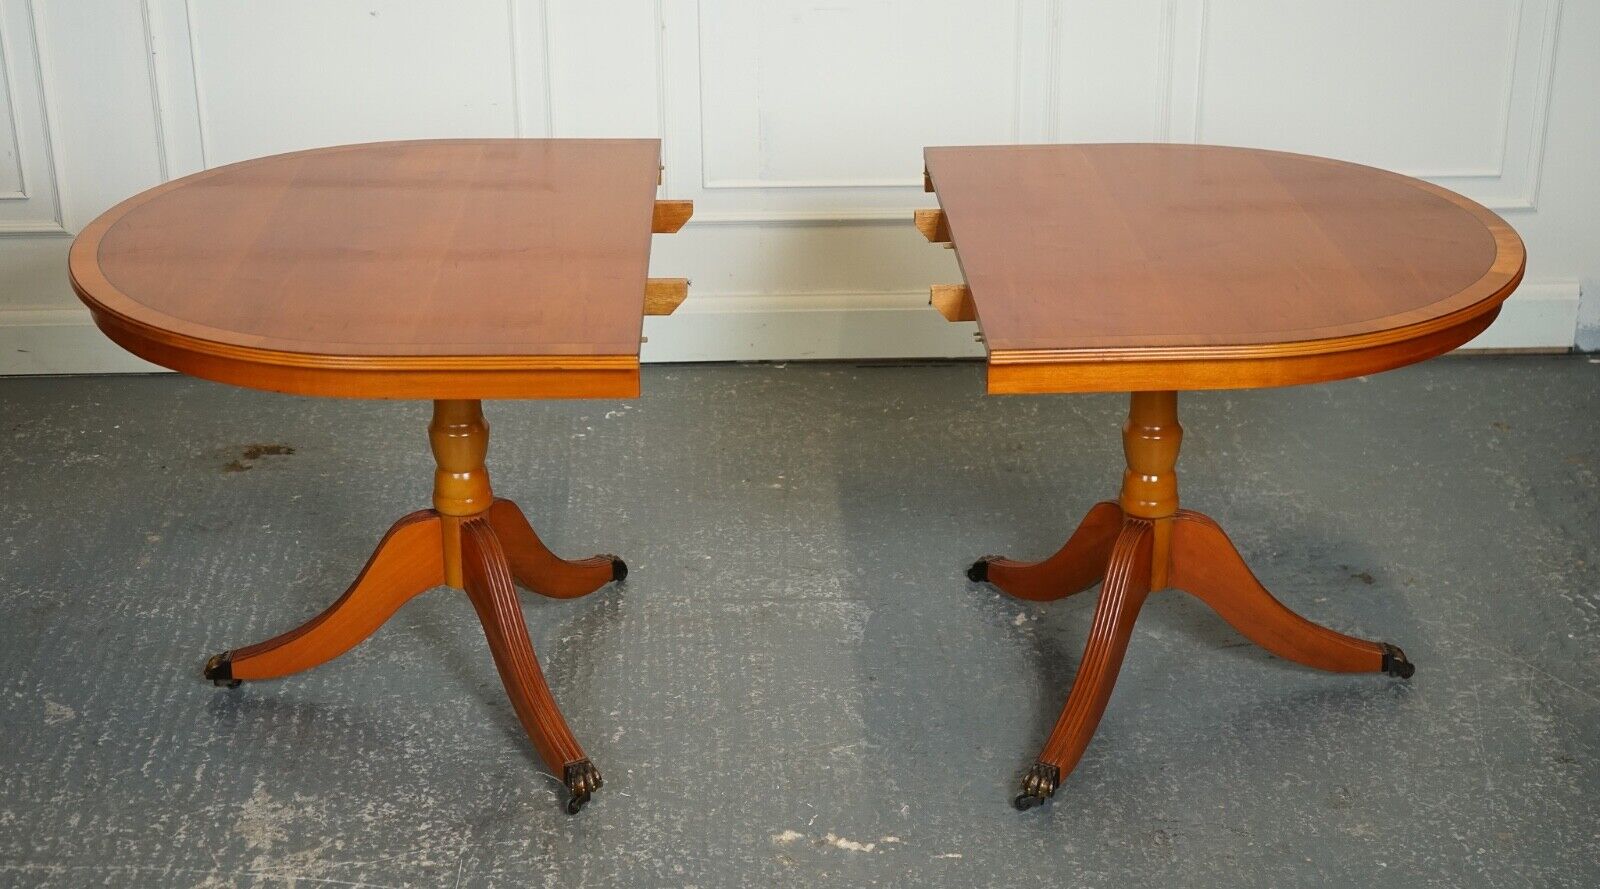 VINTAGE TWIN PEDESTAL YEW WOOD EXTENDING 6-8 SEATING DINING TABLE J1